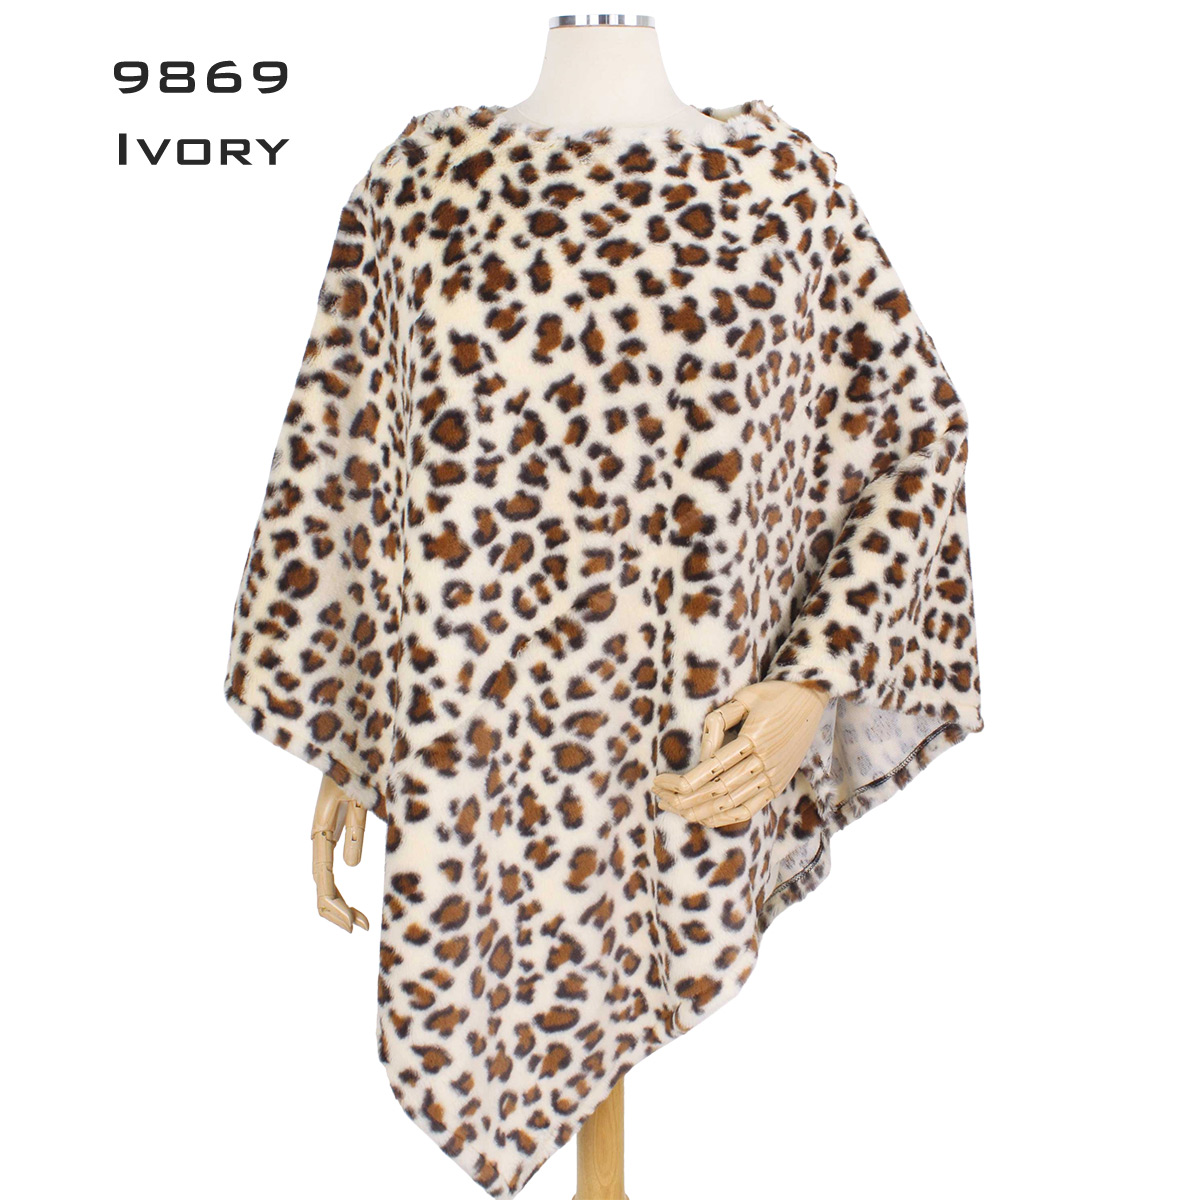 9869 SPOTTED LEOPARD IVORY Faux Fur Poncho